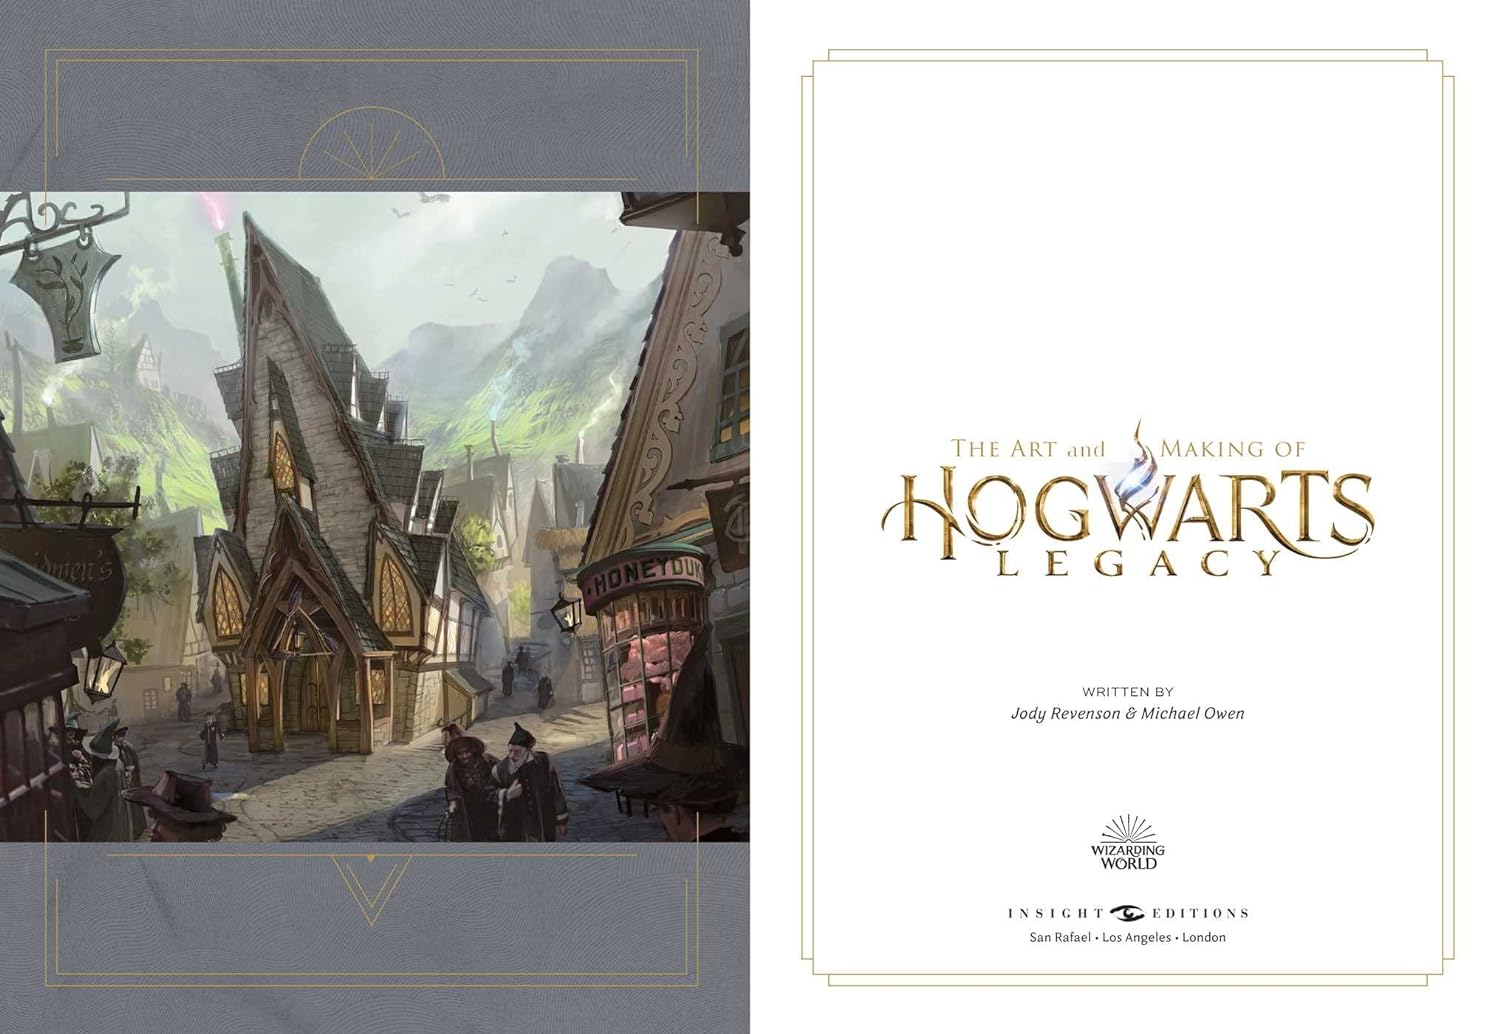 The Art and Making of Hogwarts Legacy Hardcover Introduction